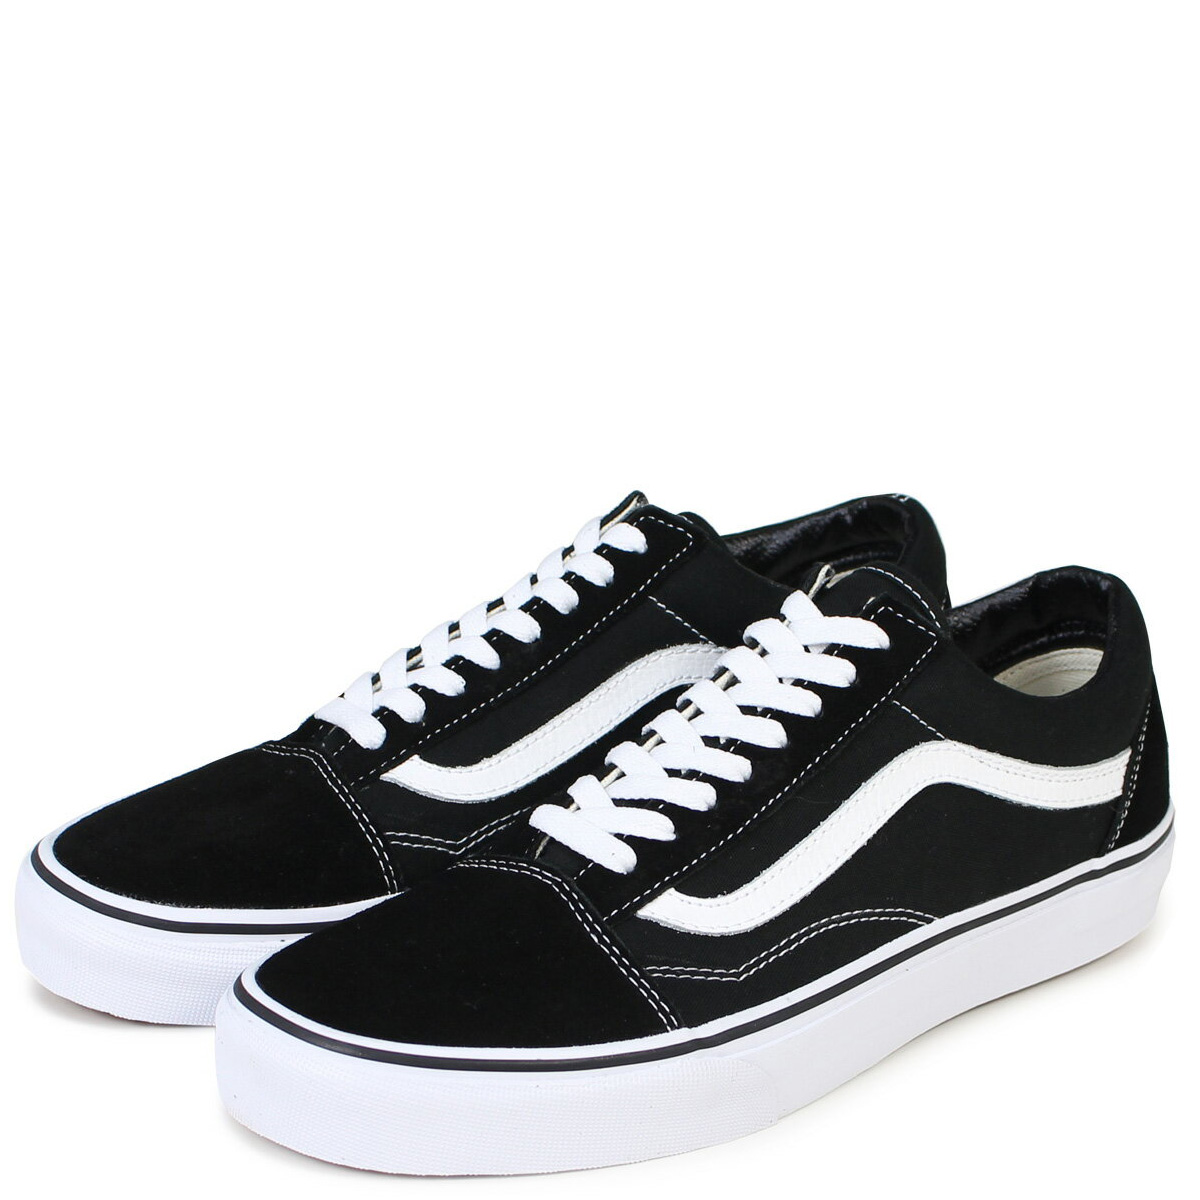 a picture of vans shoes